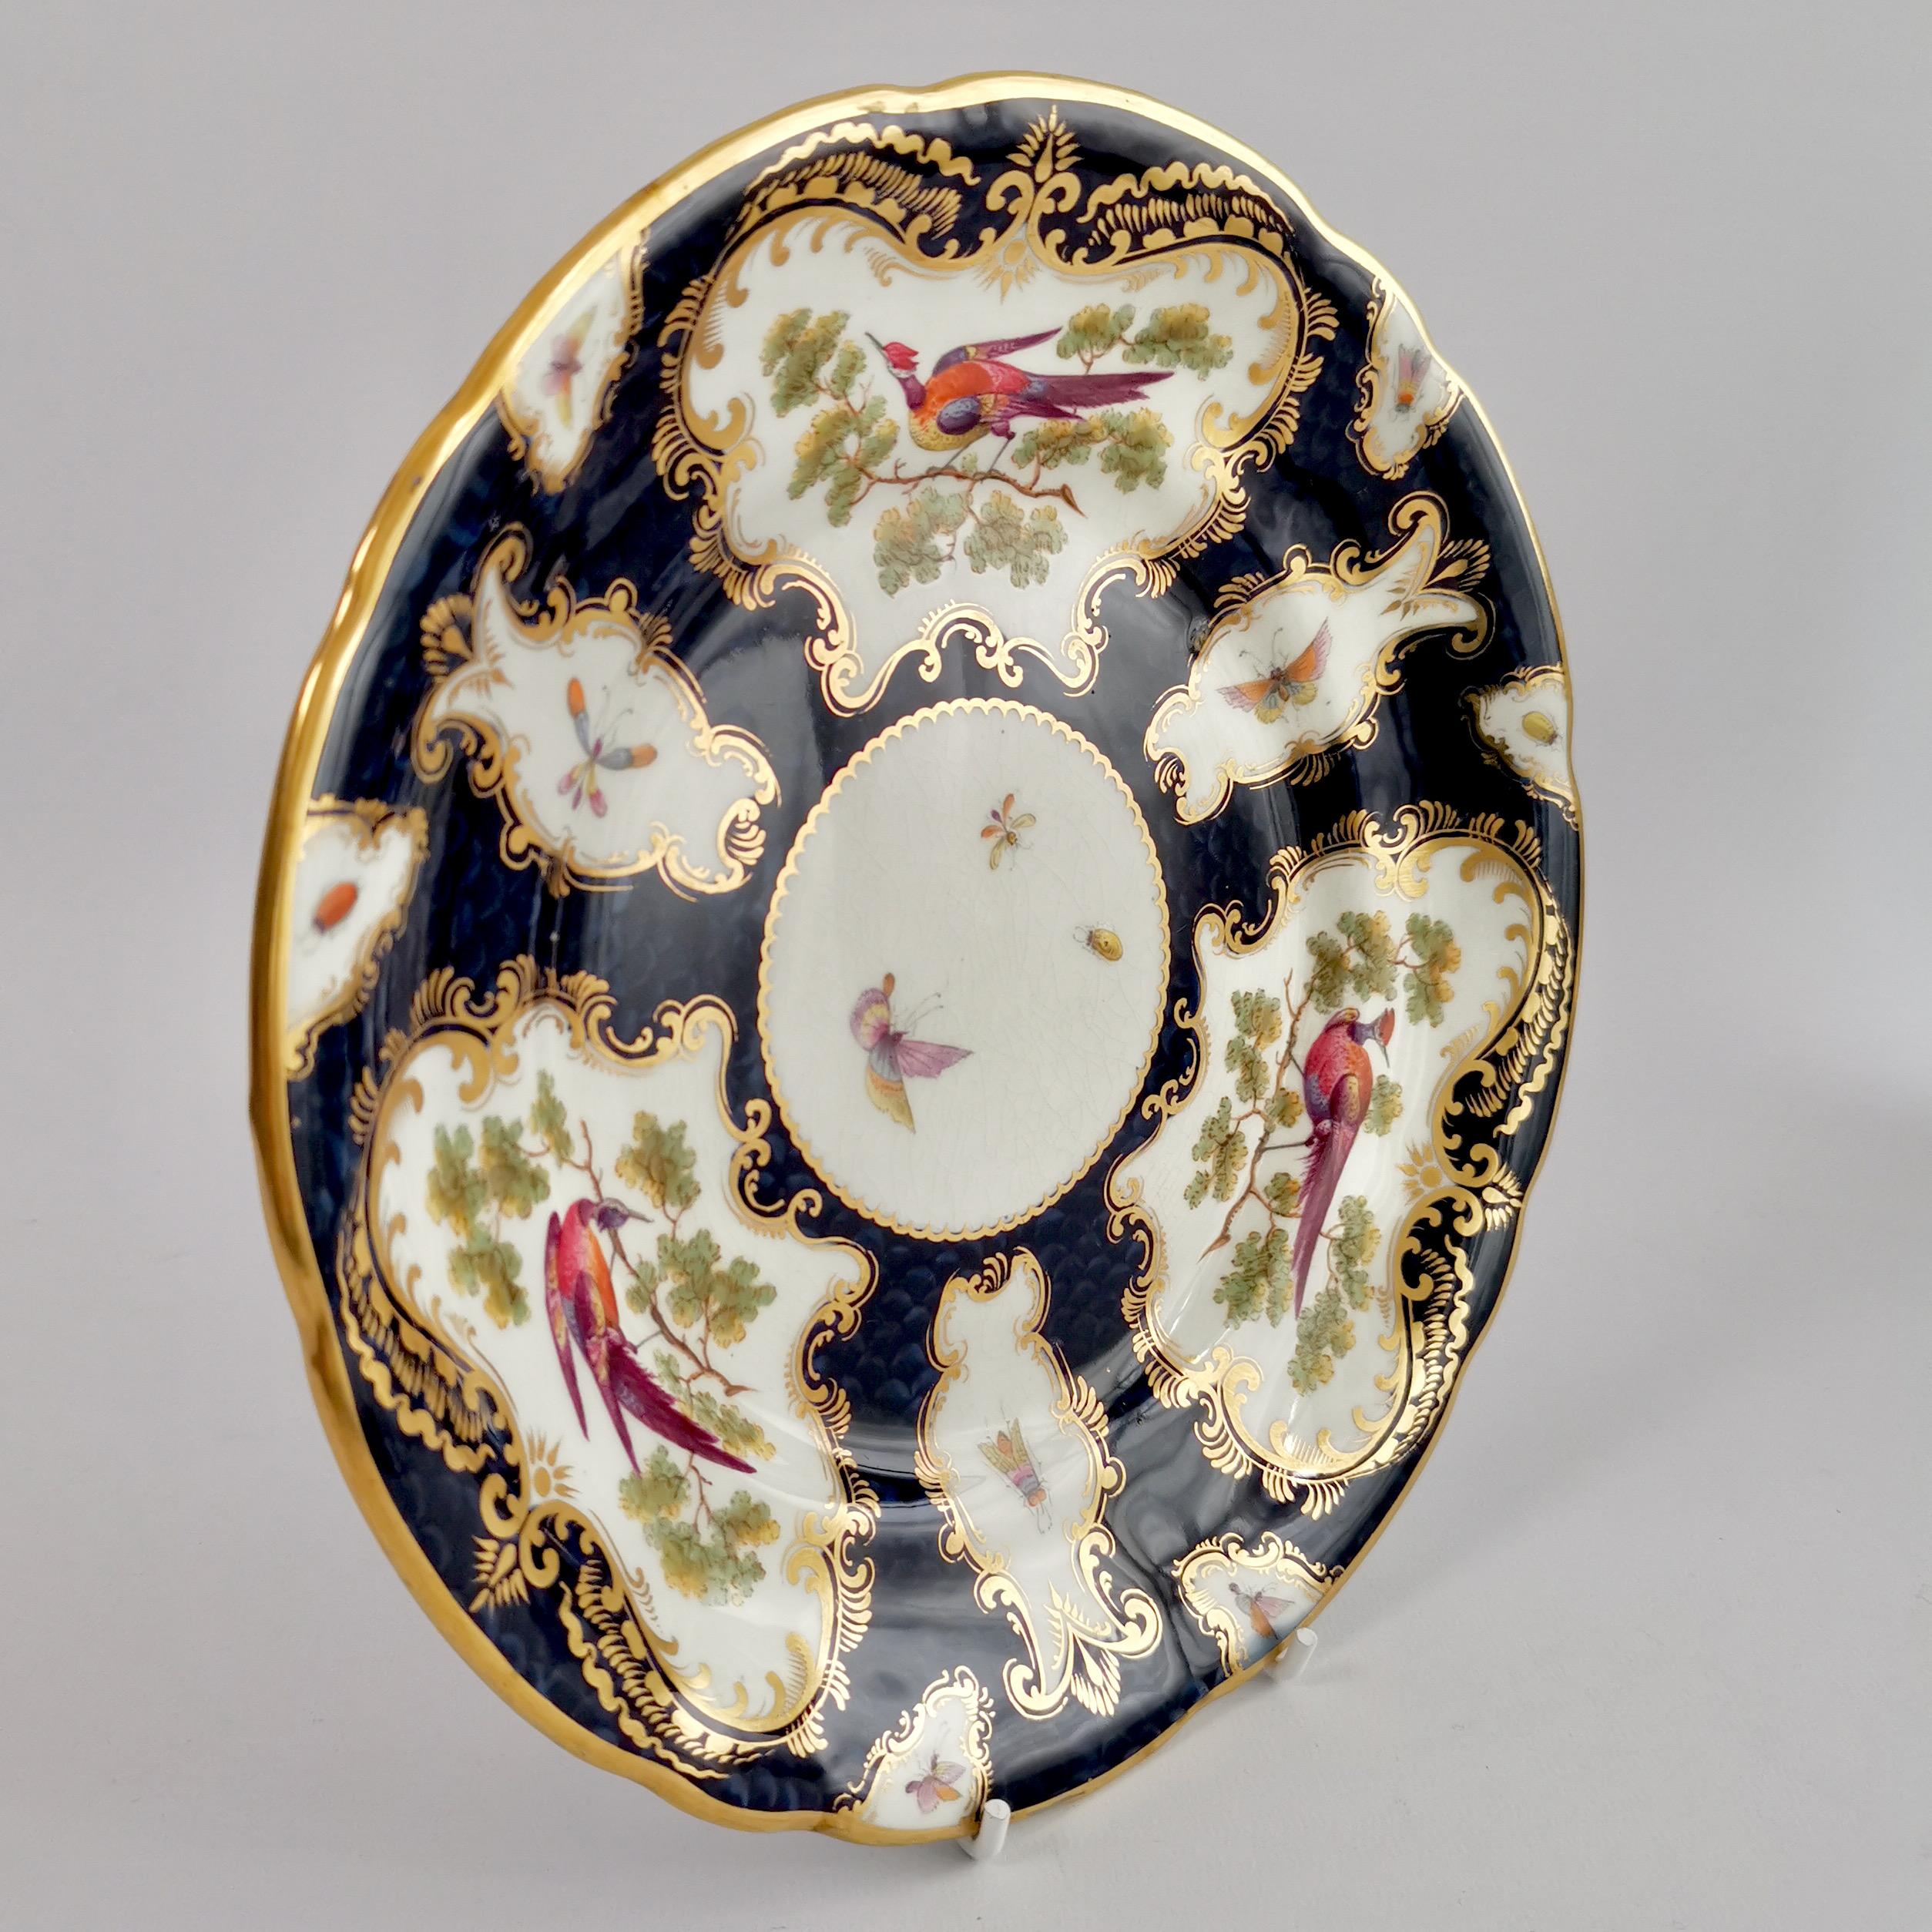 Grainger Worcester Porcelain Plate, Blue Sèvres Birds and Insects circa 1880 '2' 3